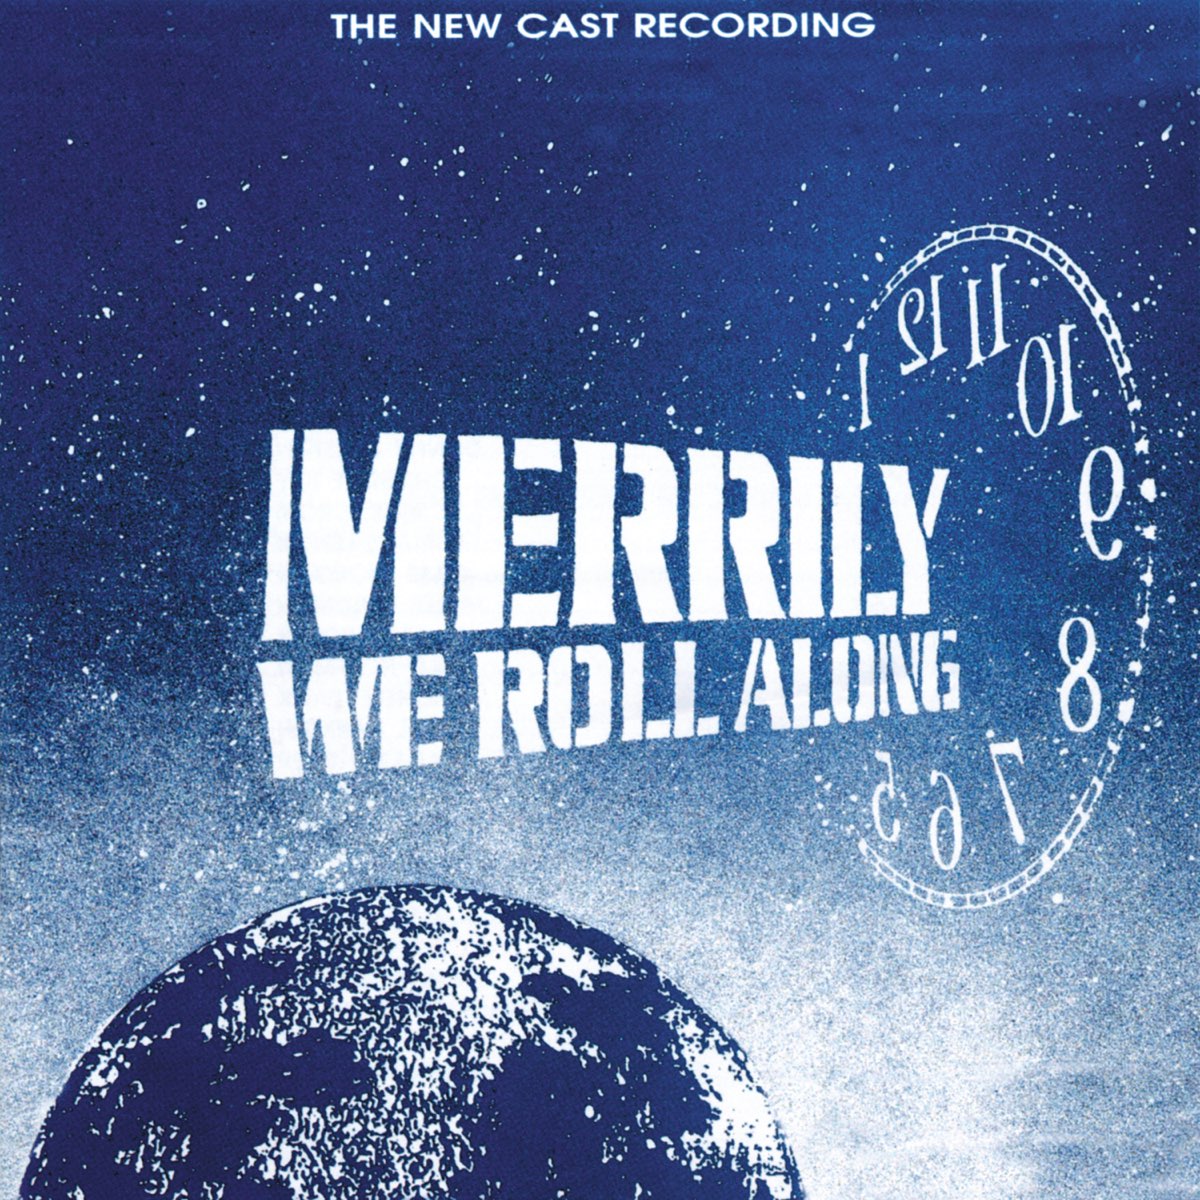 ‎Merrily We Roll Along (The New Cast Recording) [1994 OffBroadway] by